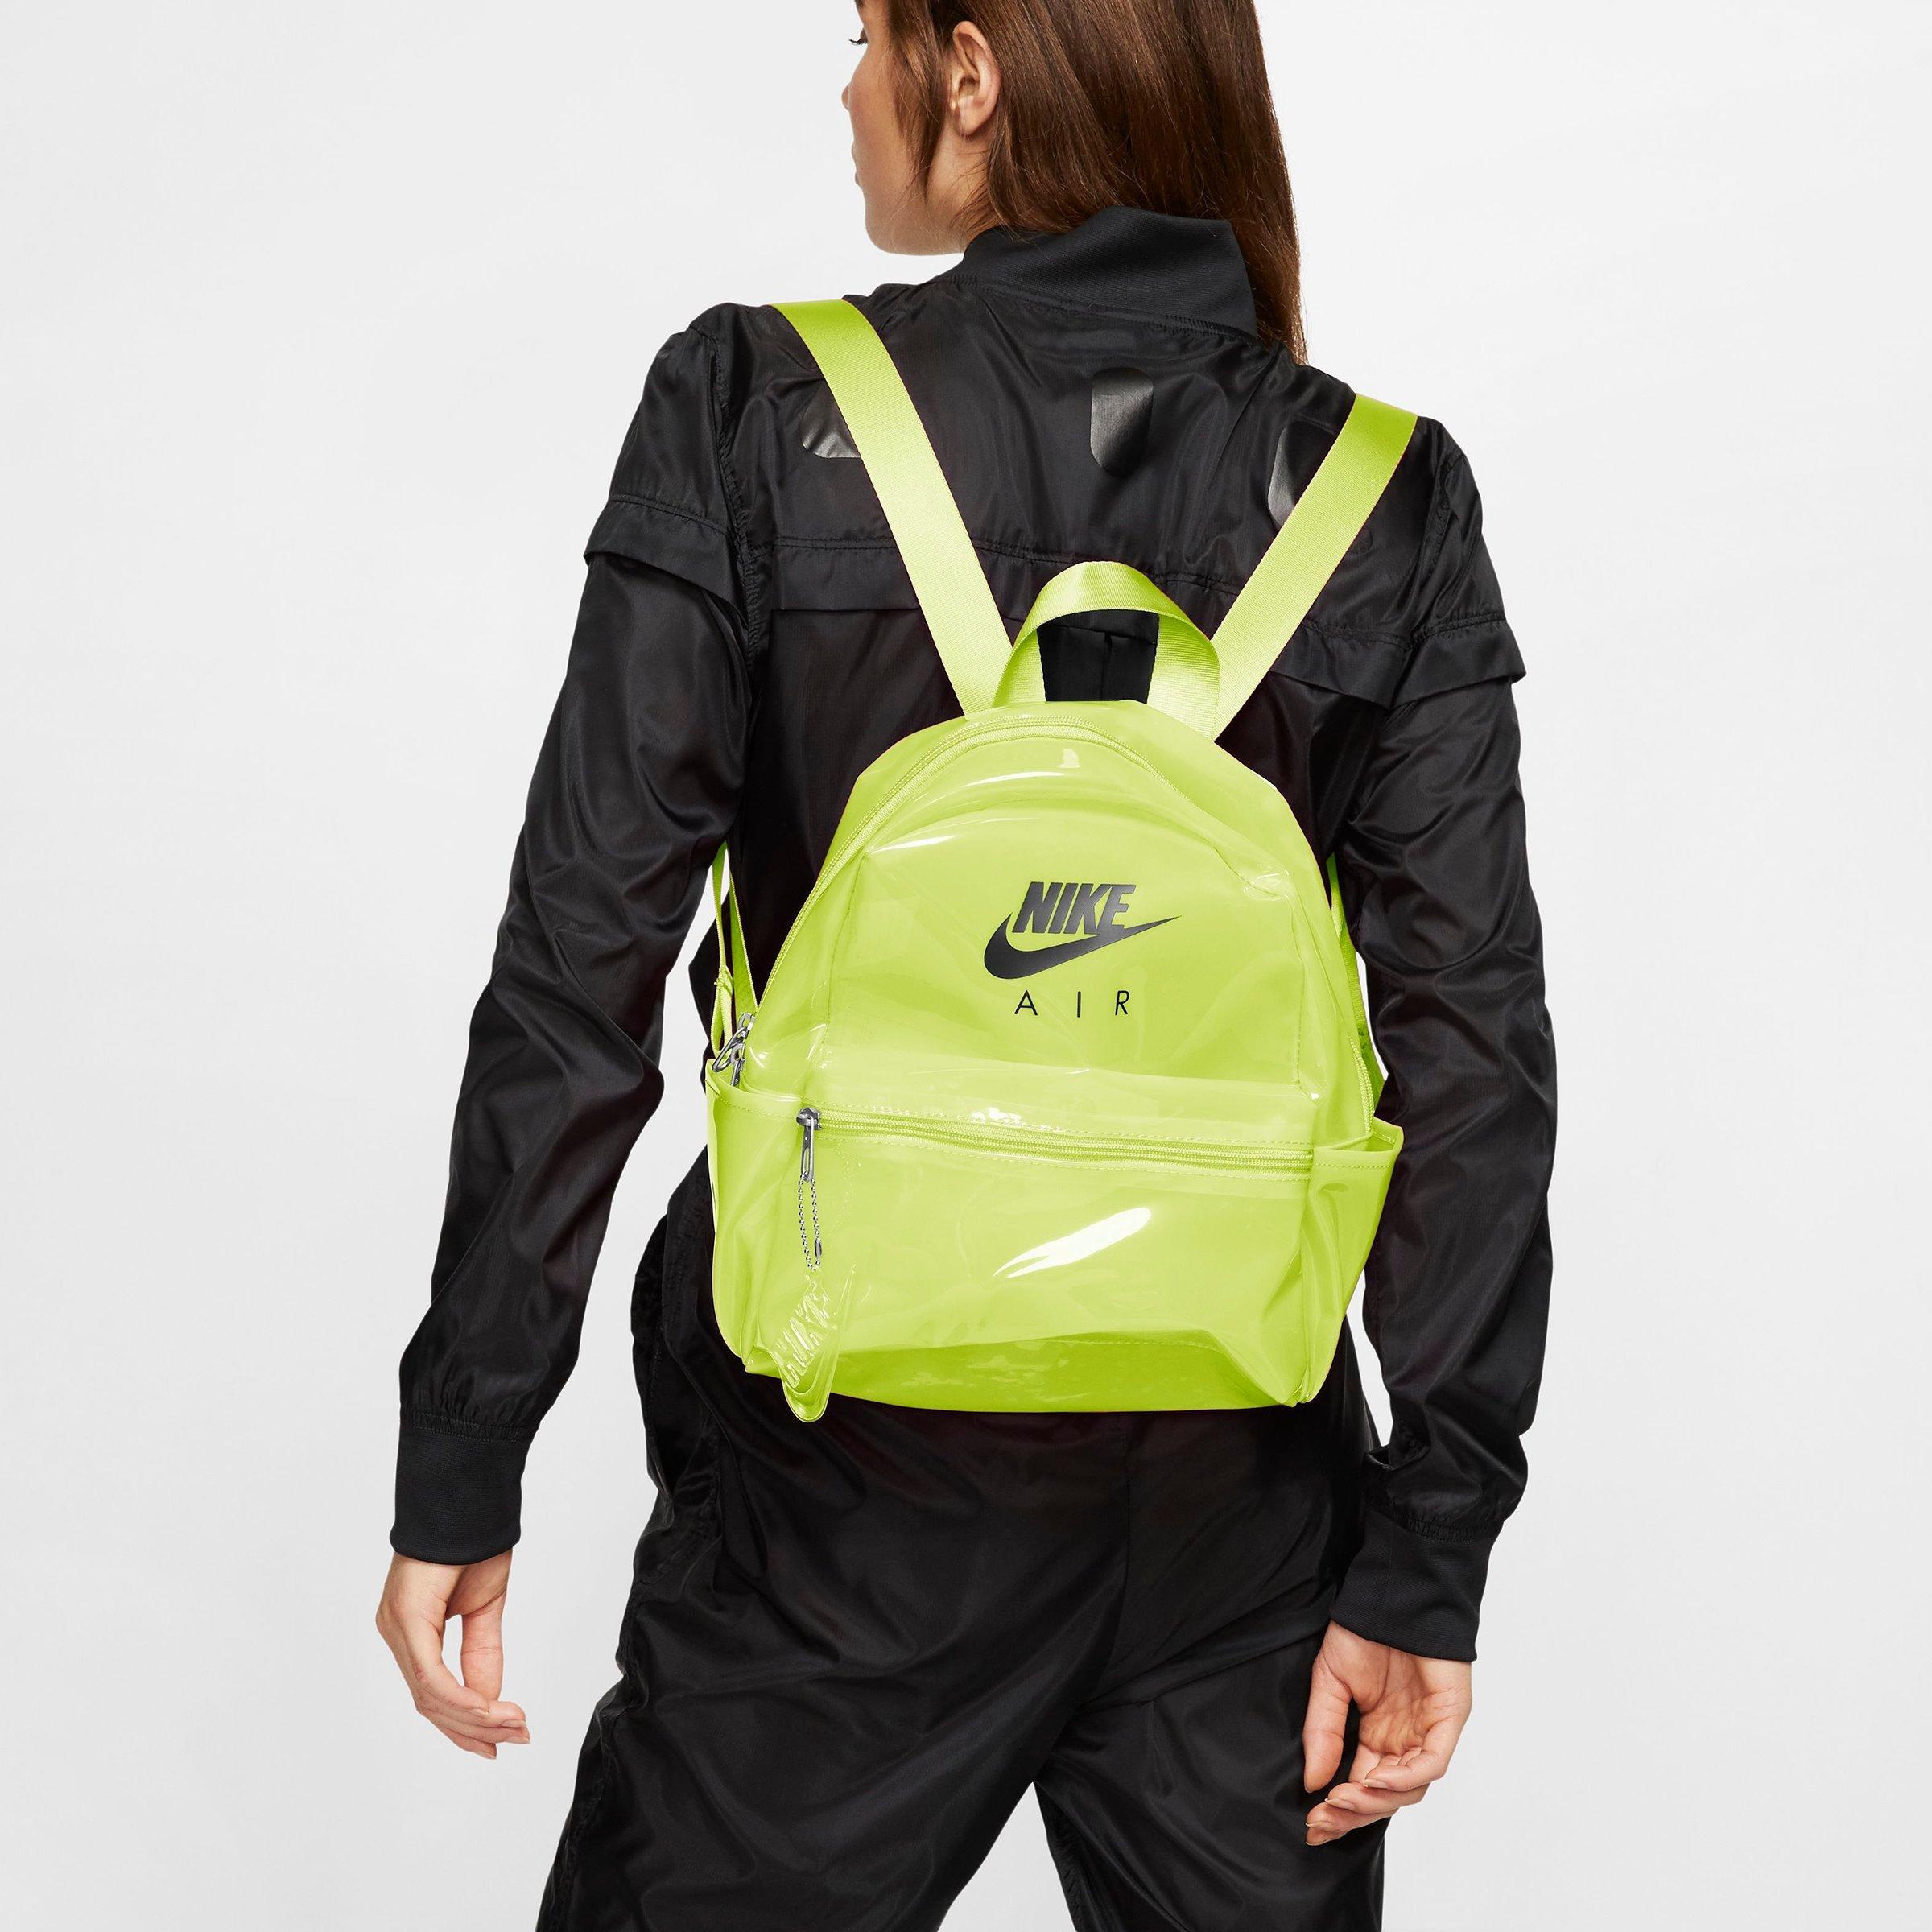 just do it mini backpack